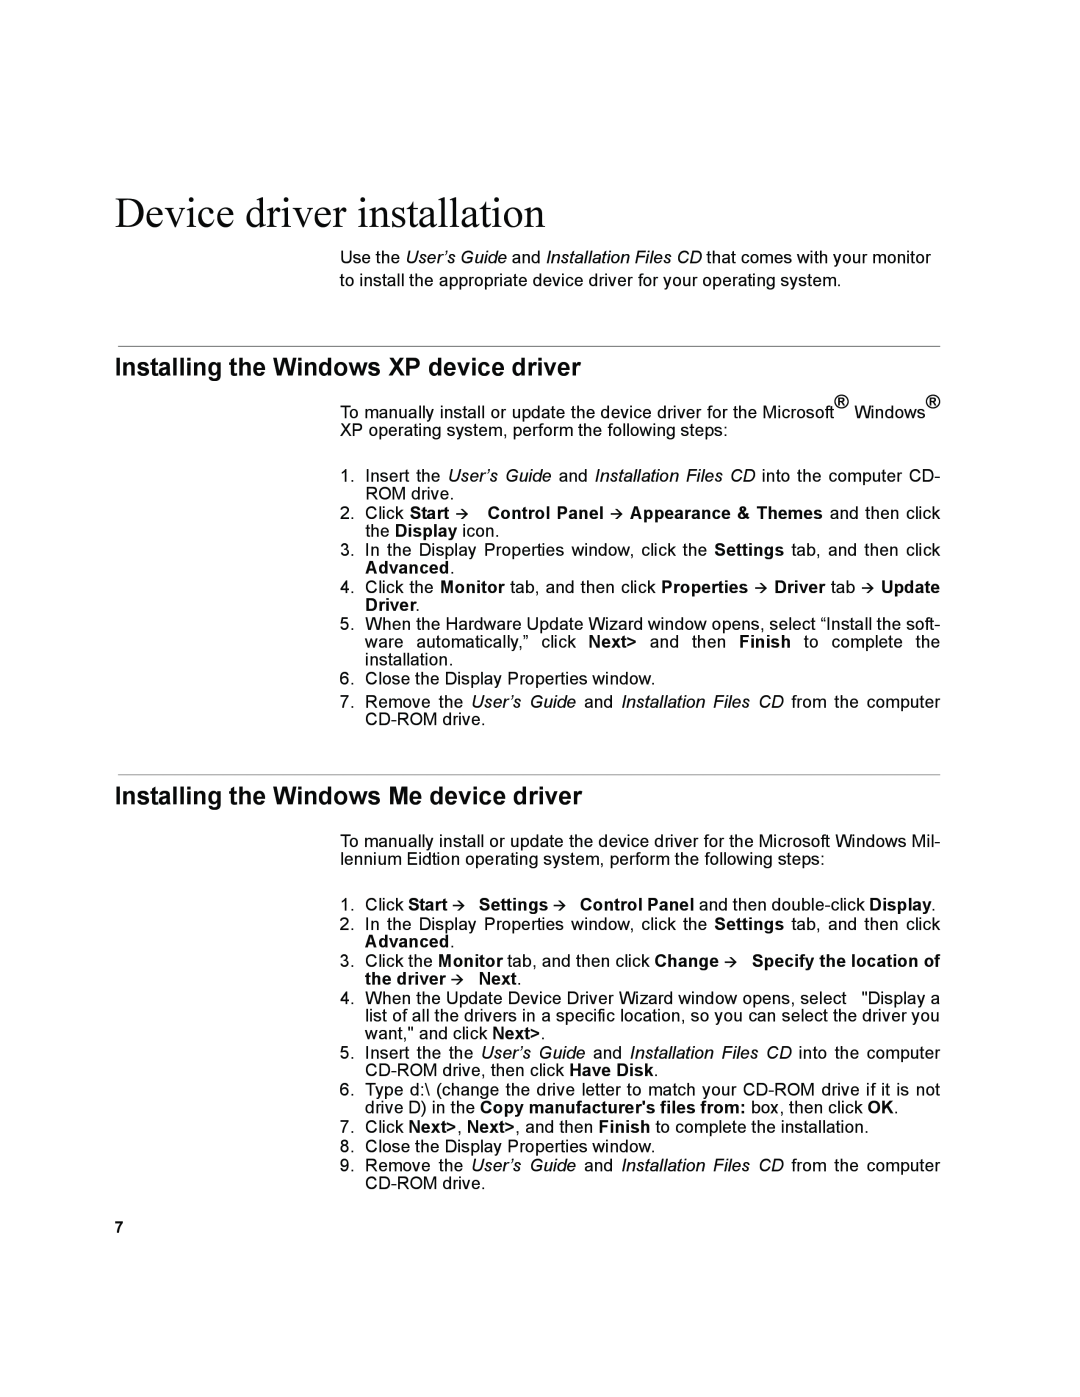 IBM T541A Device driver installation, Installing the Windows XP device driver, Installing the Windows Me device driver 